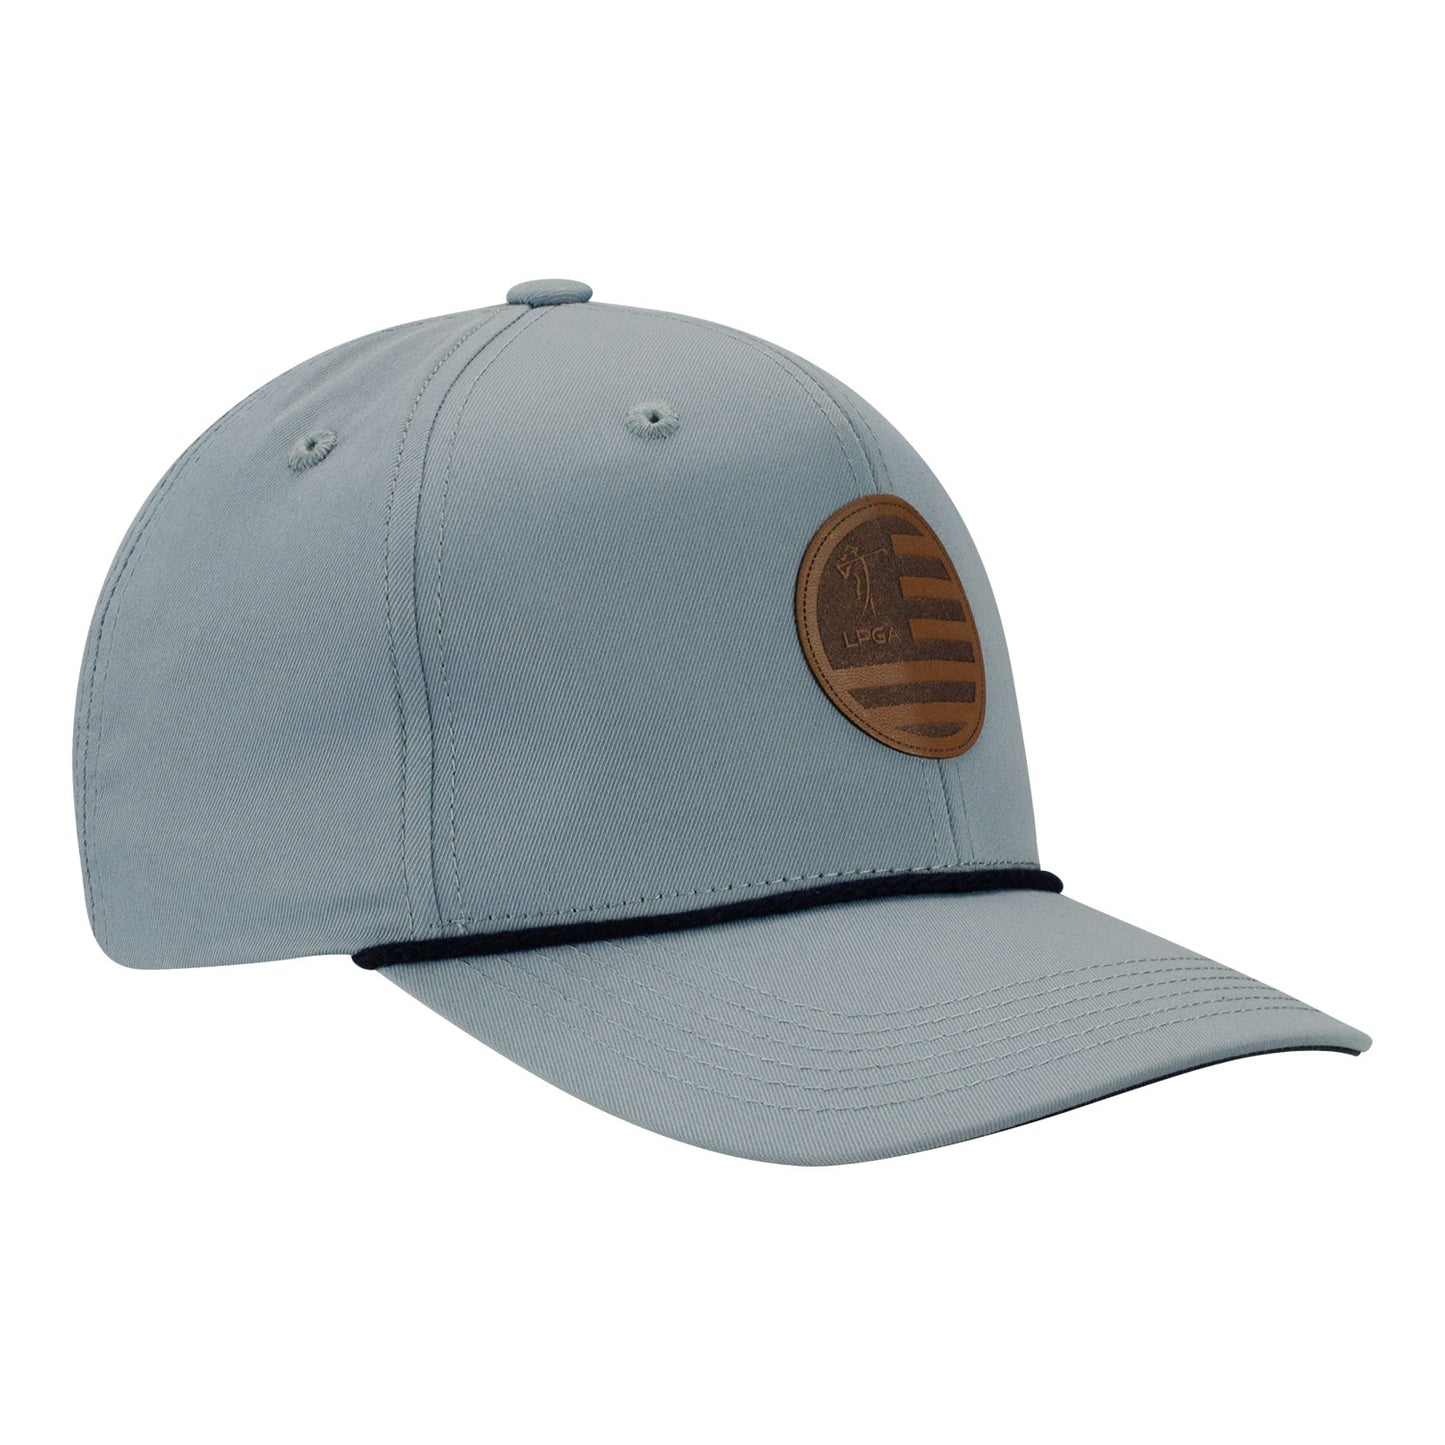 Imperial LPGA Men's Rope Hat with Suede Patch in Slate Grey - Angled Right Side View